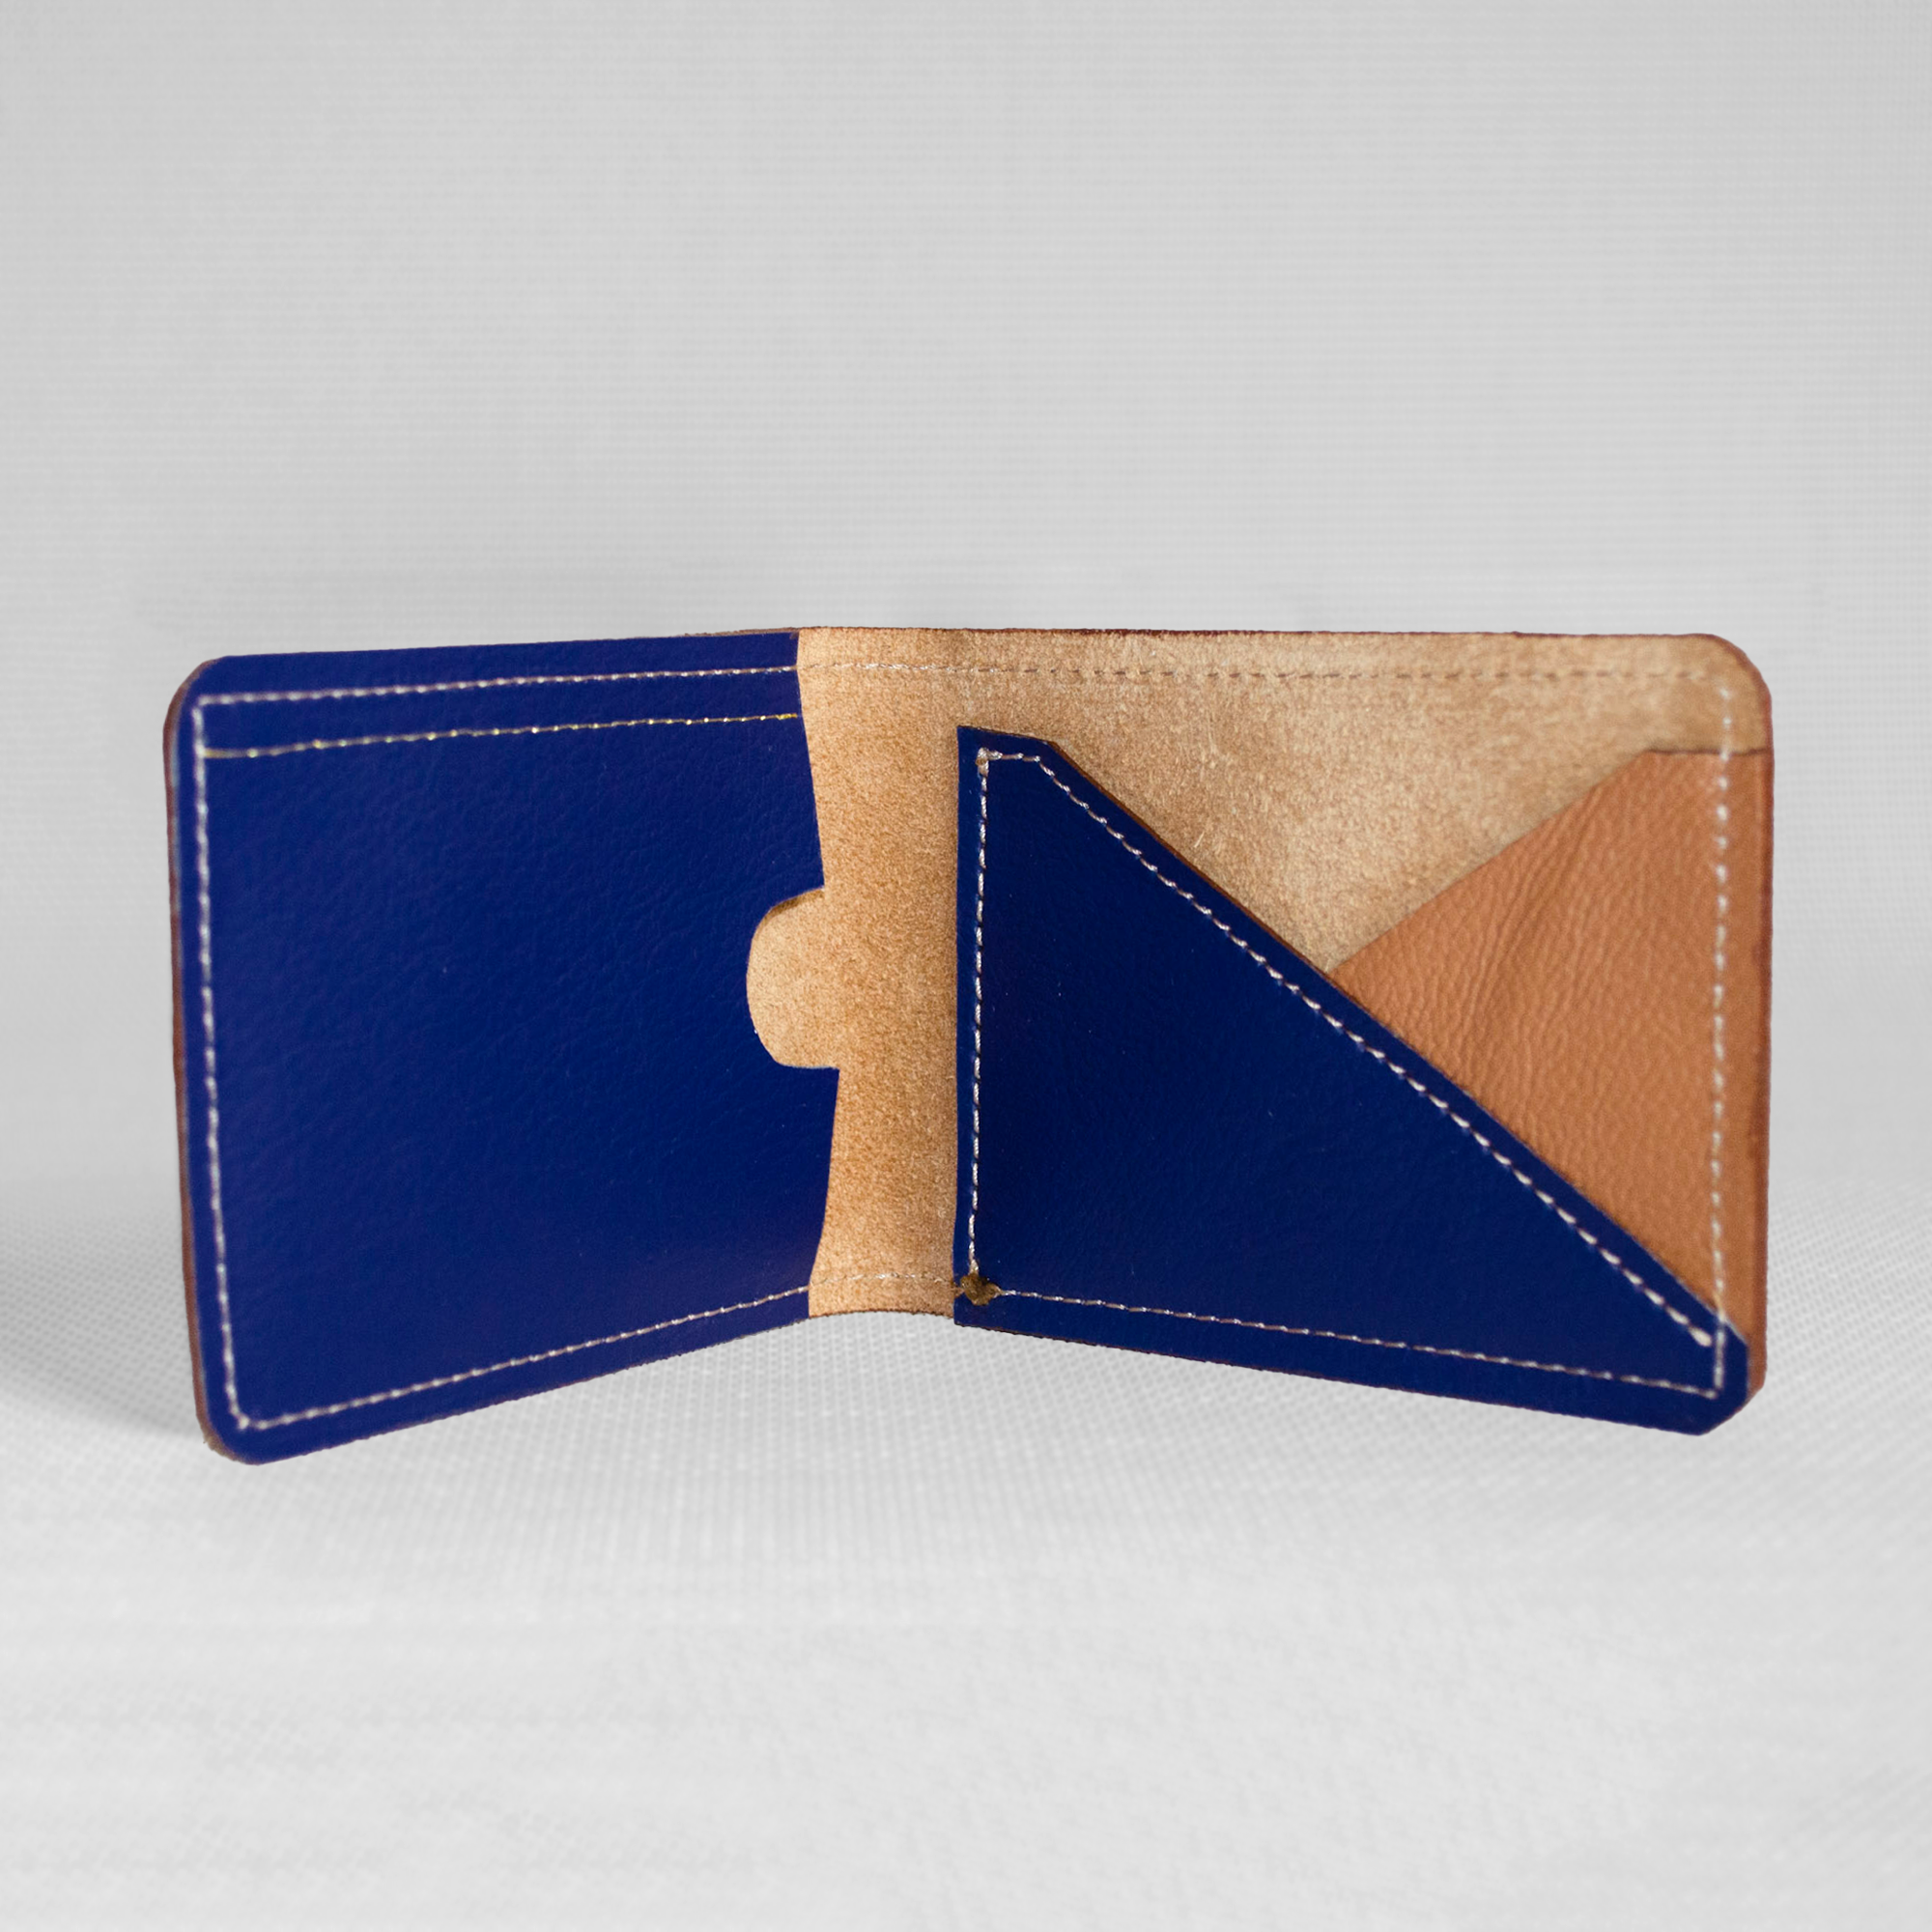 Wallet from Southwest Airlines Leather